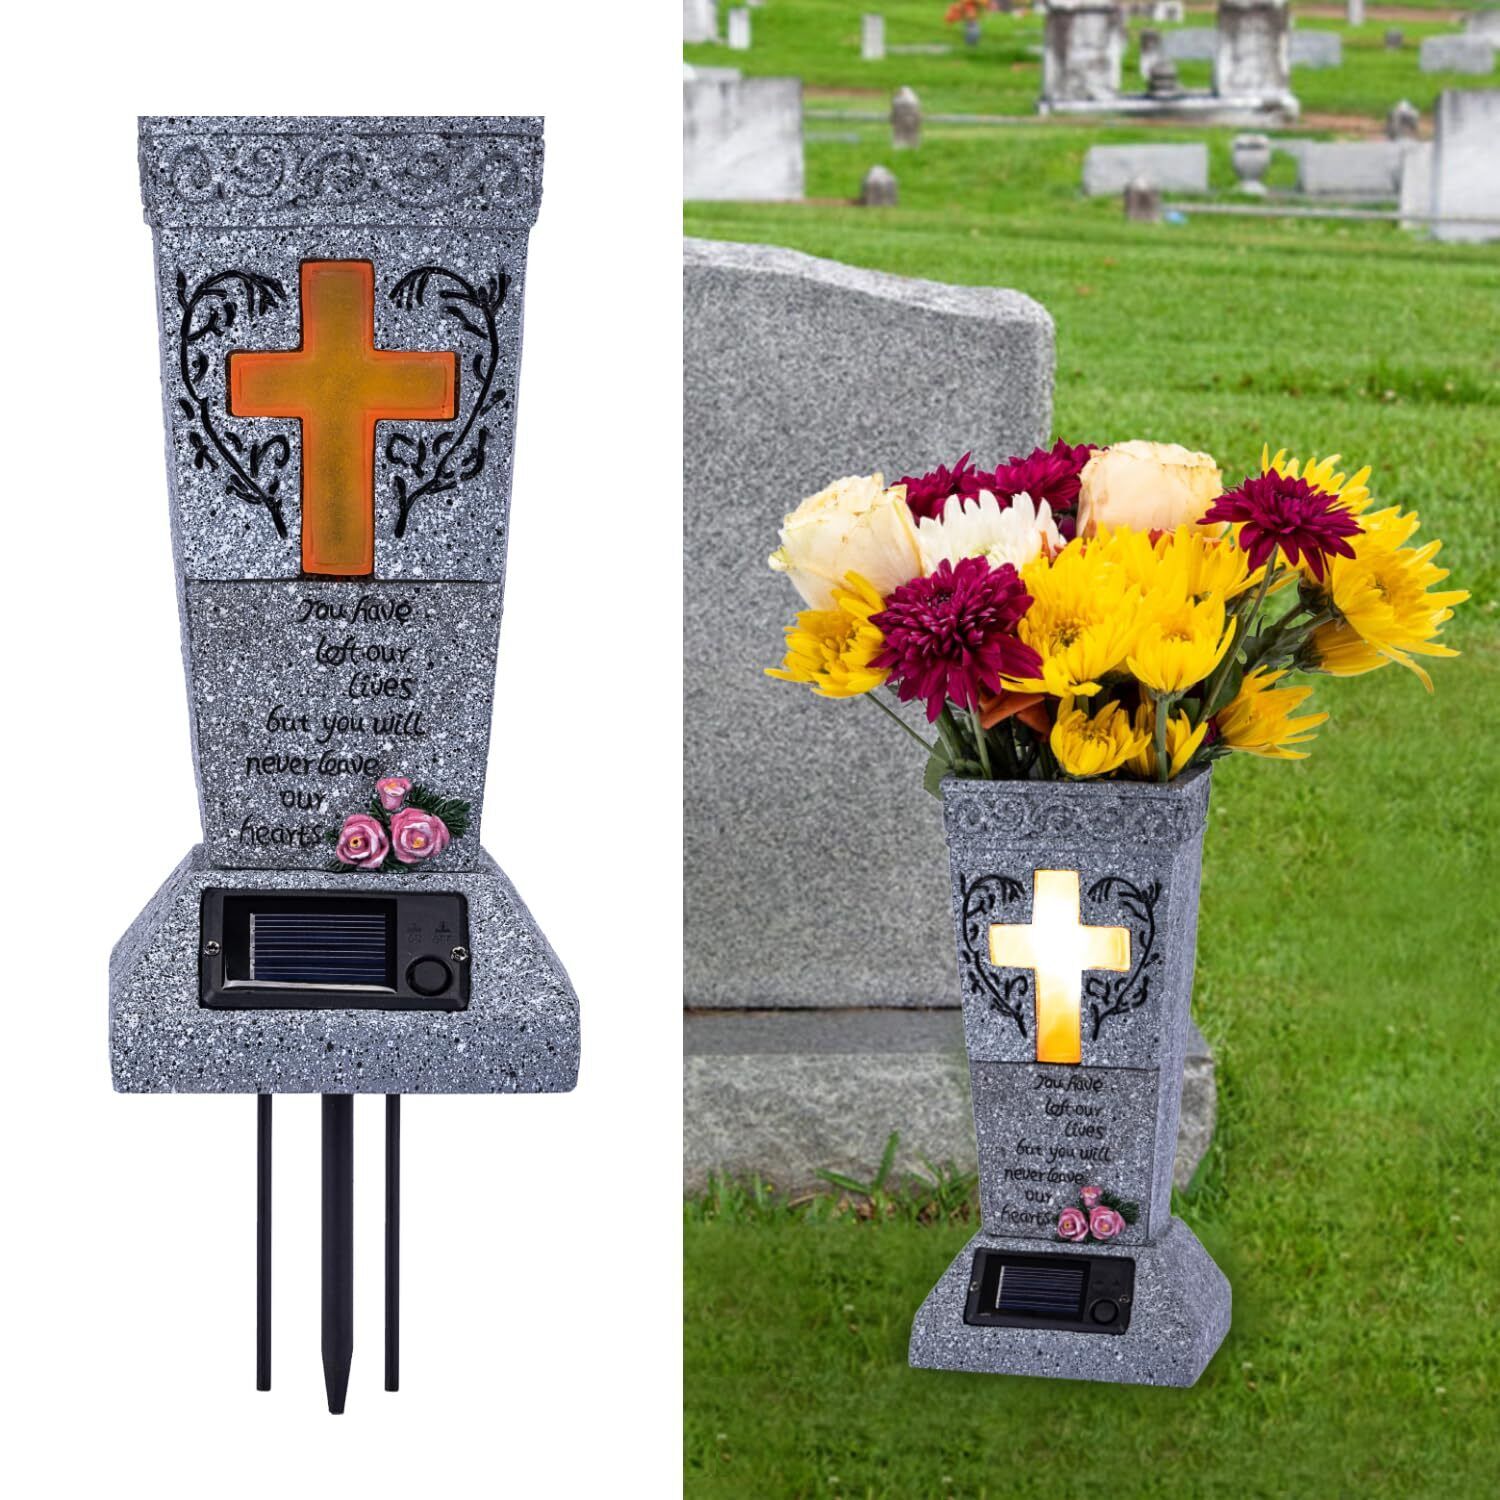 HUYIENO Solar Cemetery Grave Vase with LED for Fresh/Artificial Flowers Heads...